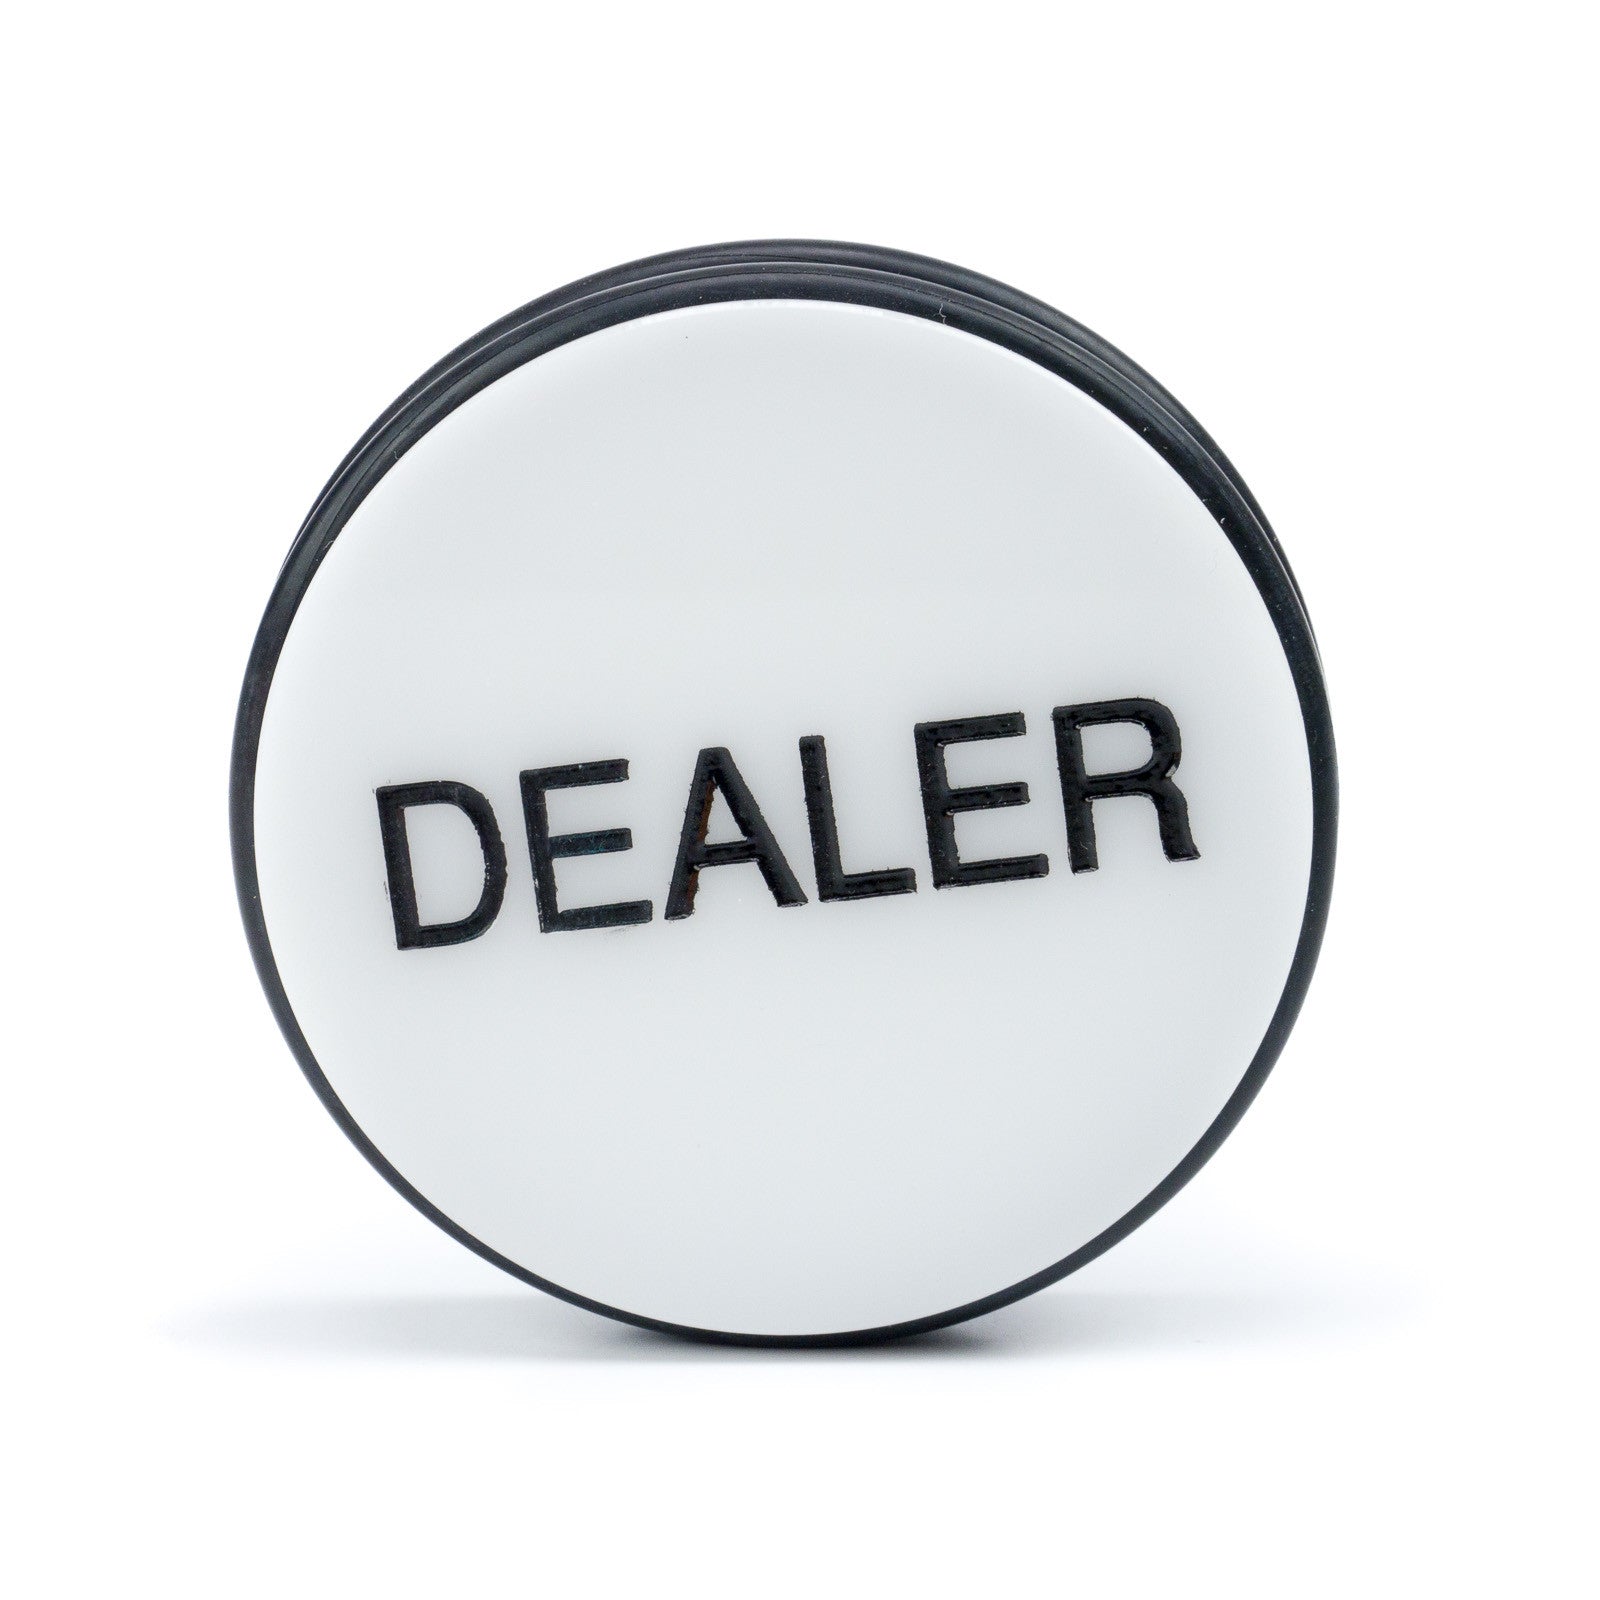 3 Inch Dealer Puck Engraved Casino Quality - Casino Supply - 1